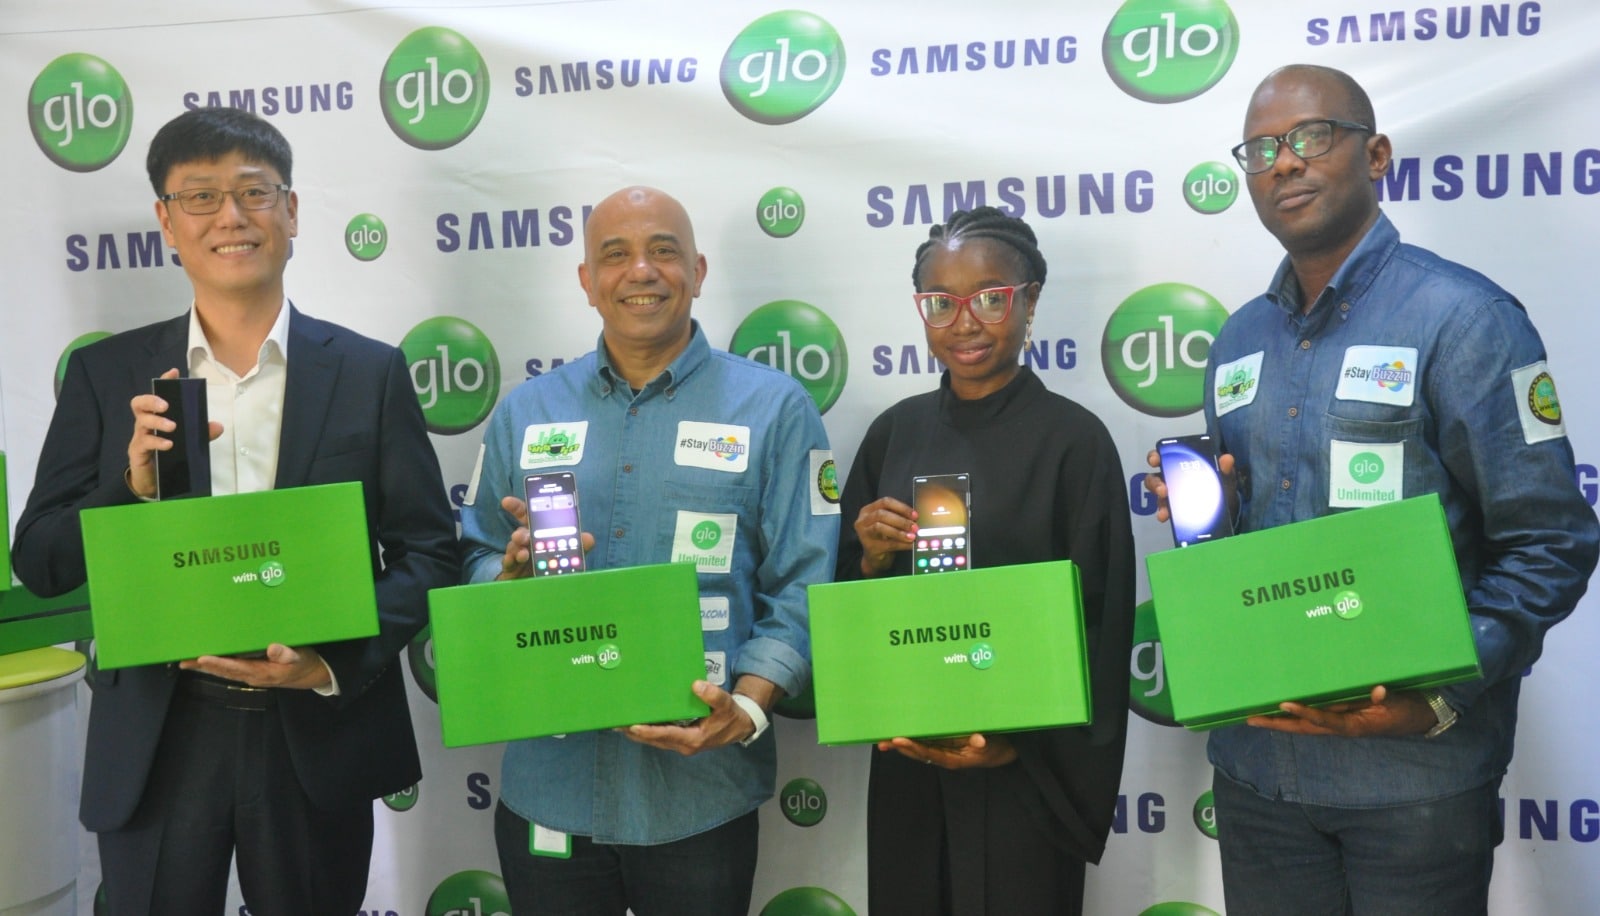 Galaxy S23 phone models unveiled by Glo, Samsung